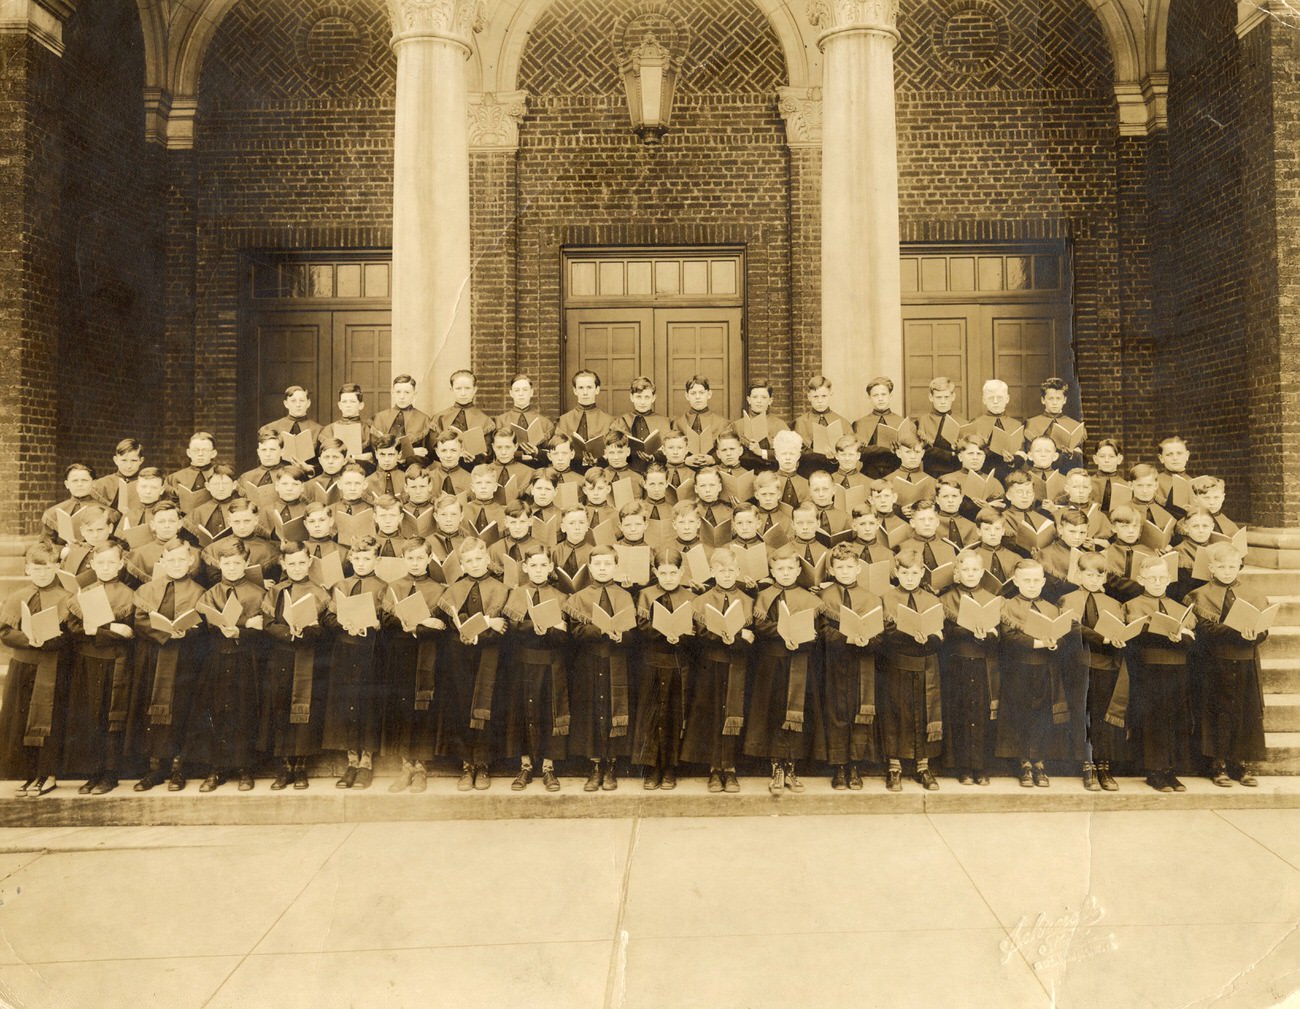 Young boys in church garb on the front steps of Holy Rosary Church, Columbus, 1930s